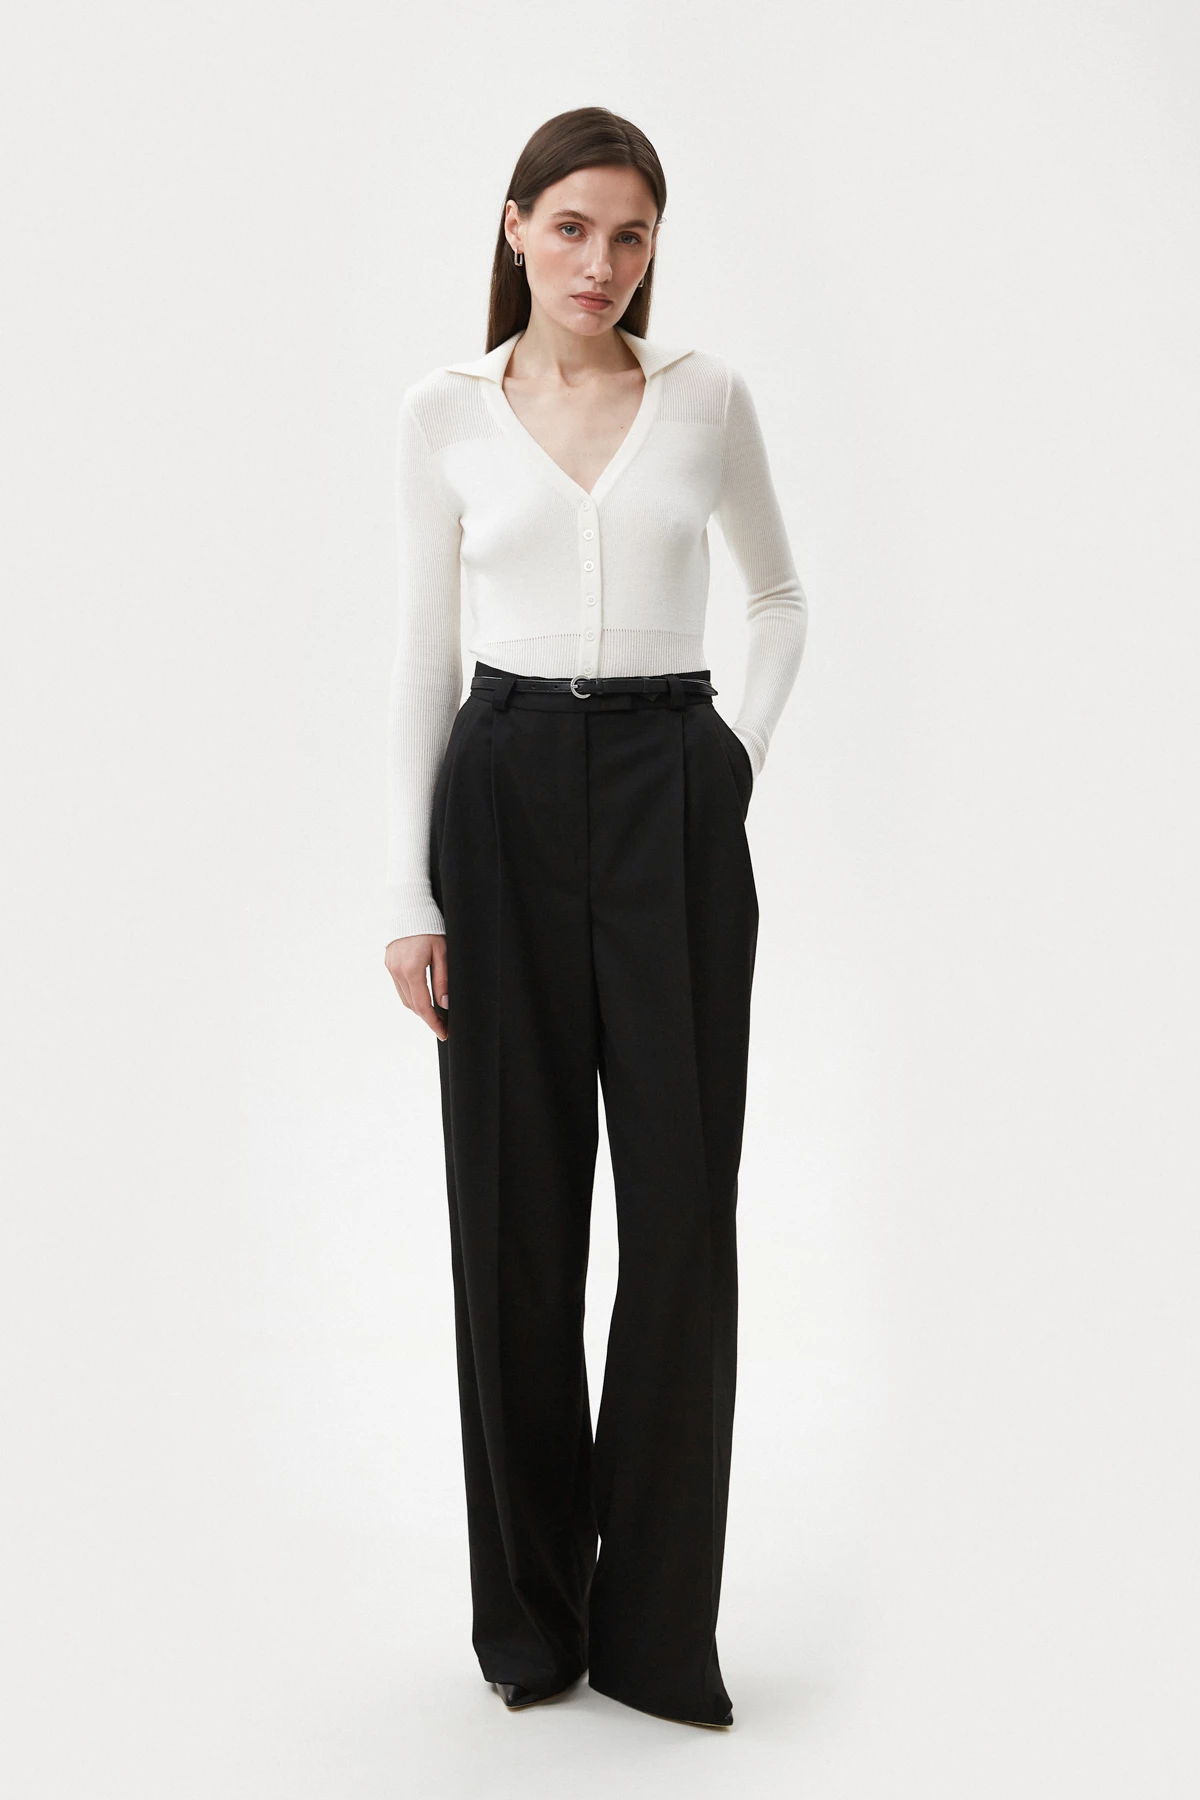 Black loose fit pants made of viscose suit fabric, photo 3